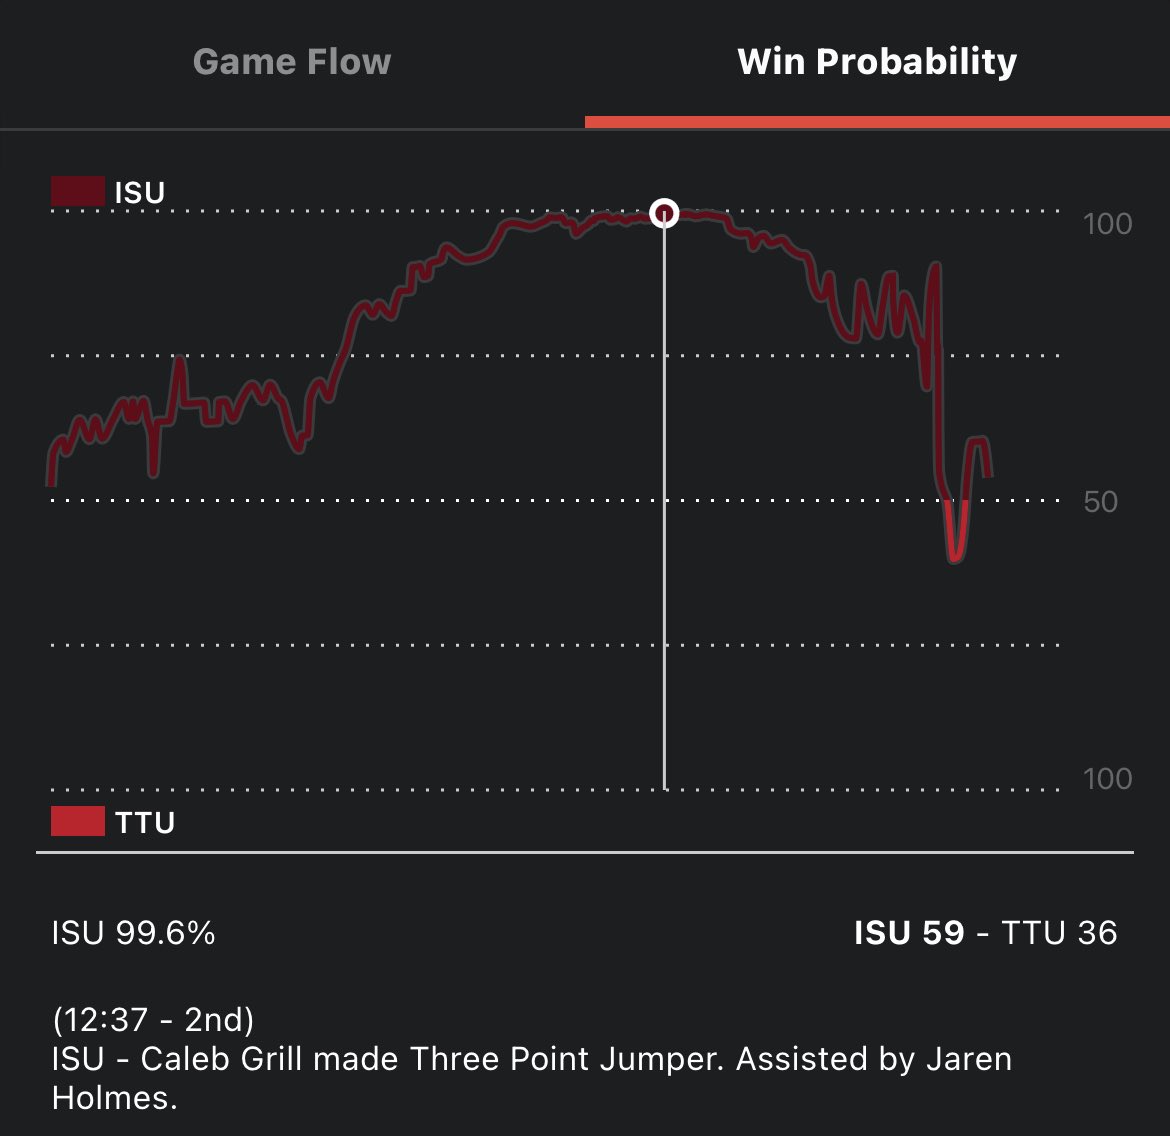 With 12 minutes left to go, @TexasTechMBB had a 0.4% chance of winning #NeverGiveUp #TogetherWeAttack